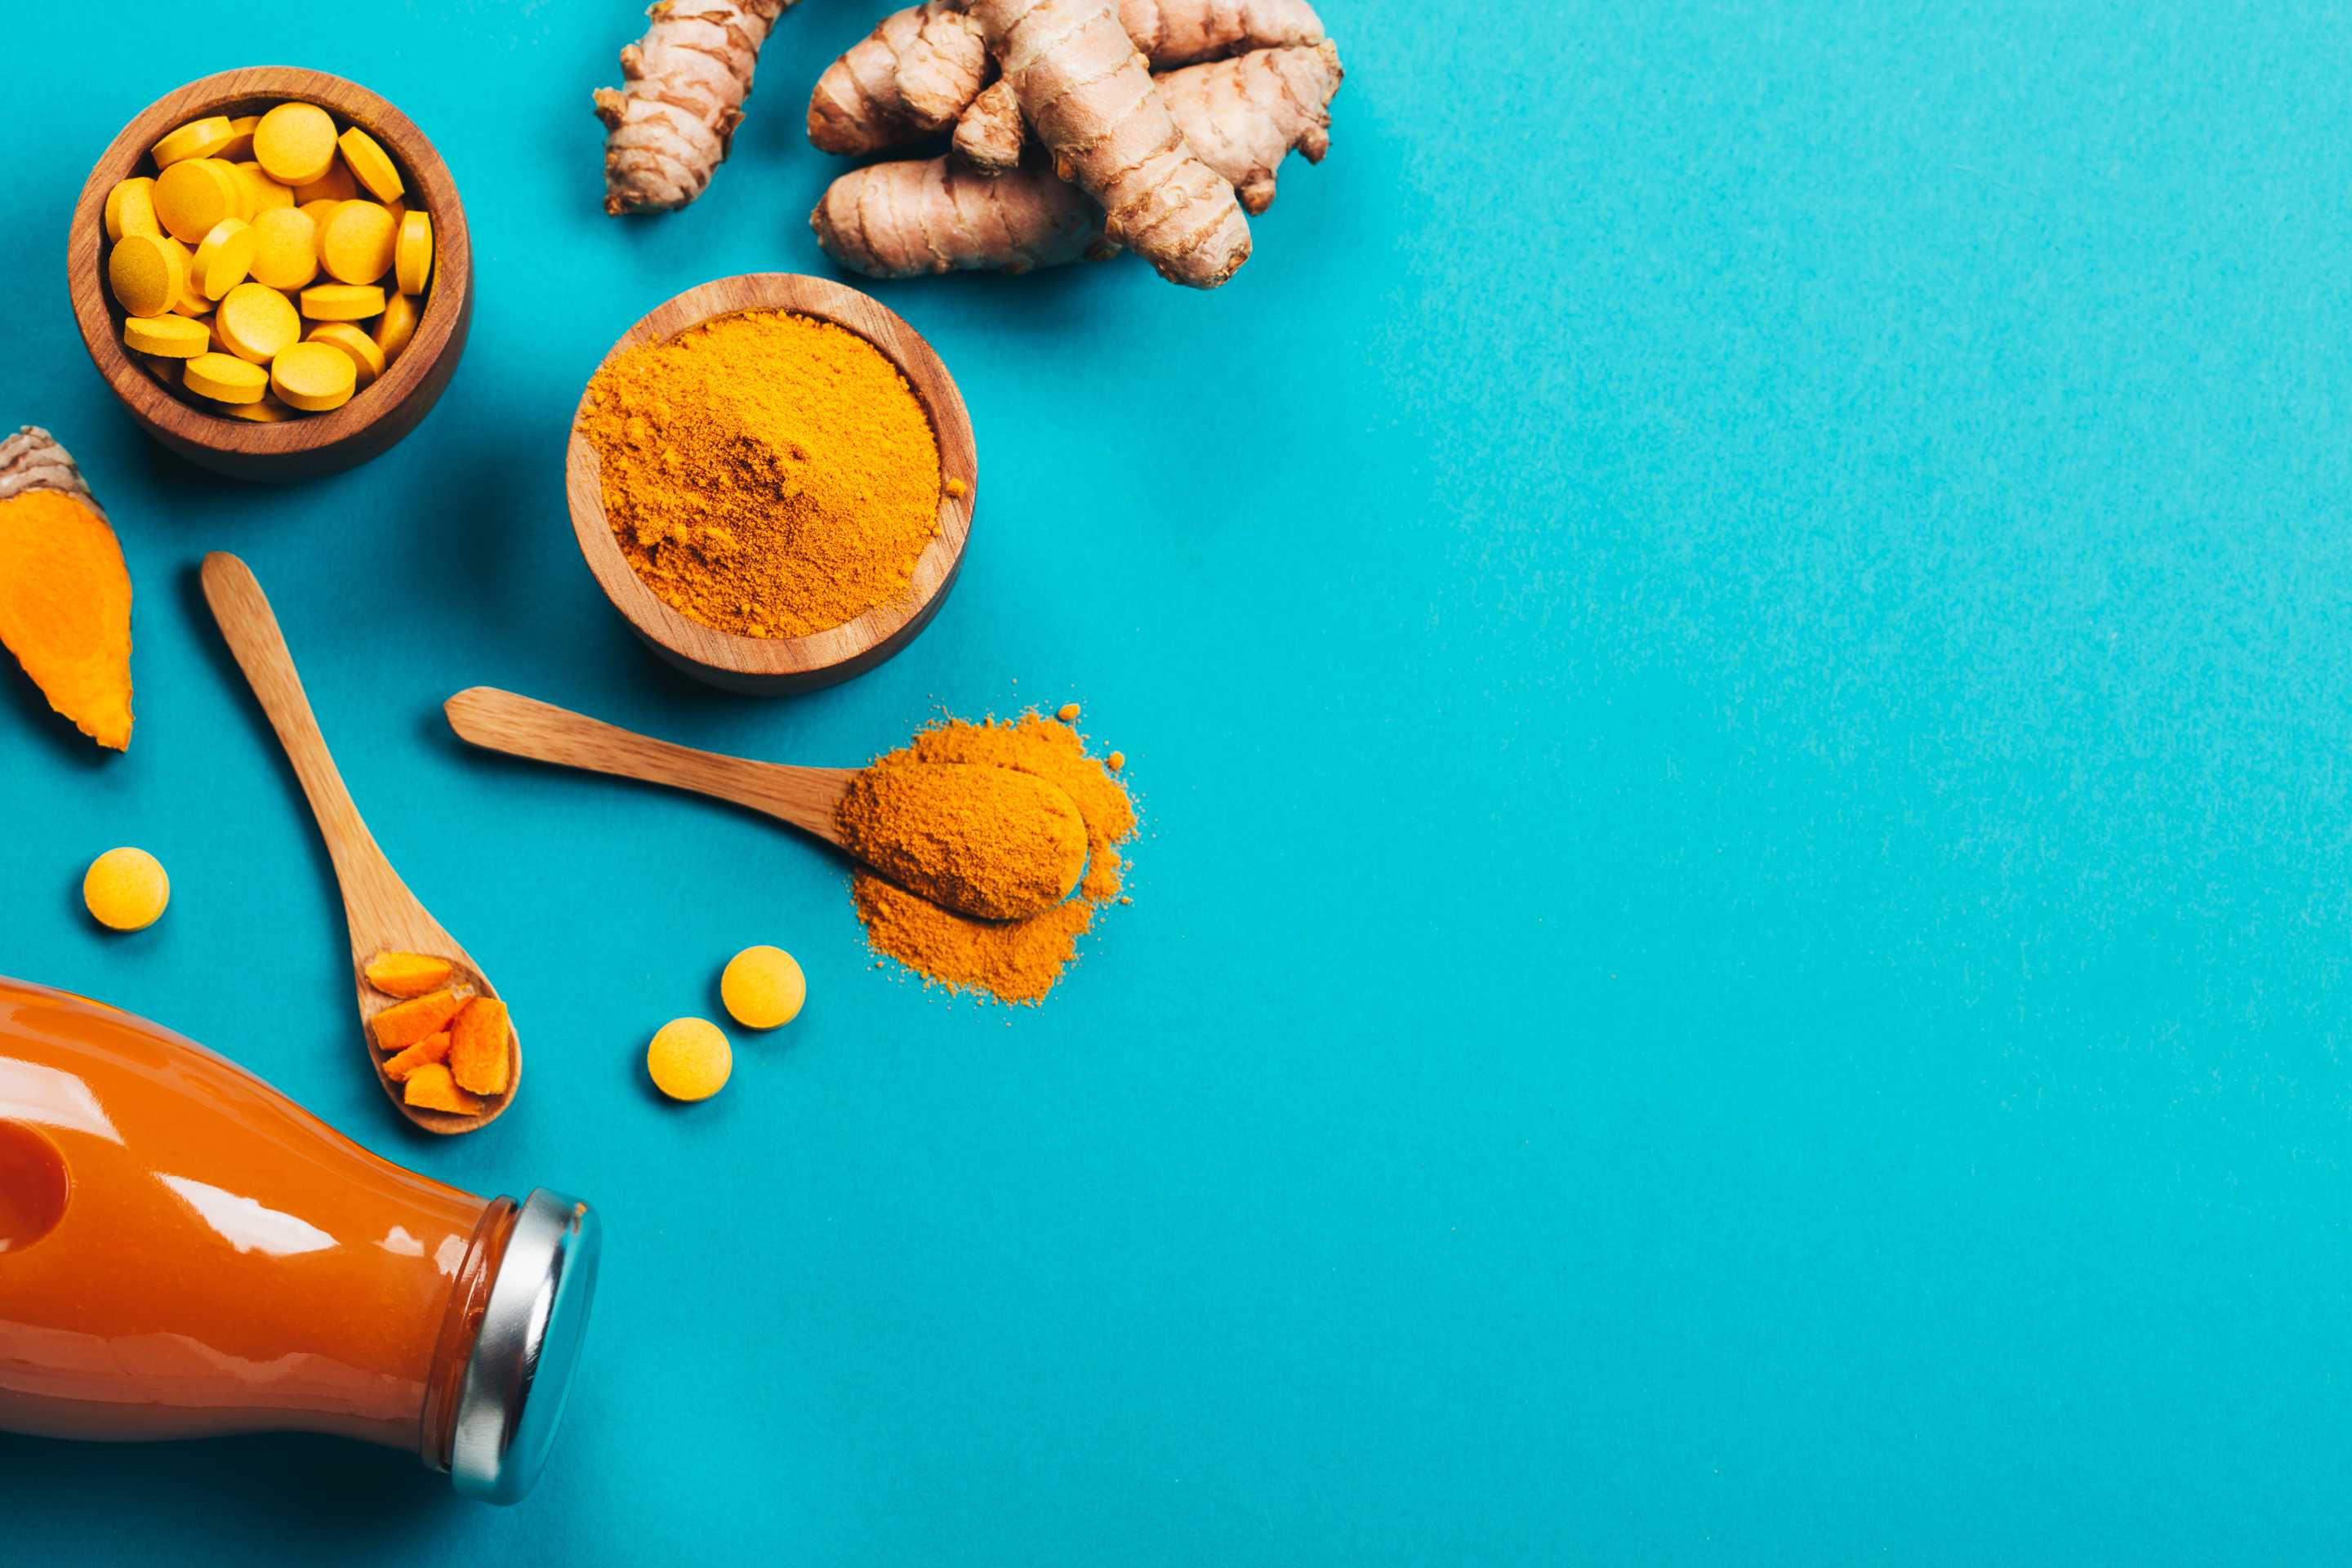 microsoft, what is the safe amount of turmeric to take? a review by nutrition professionals